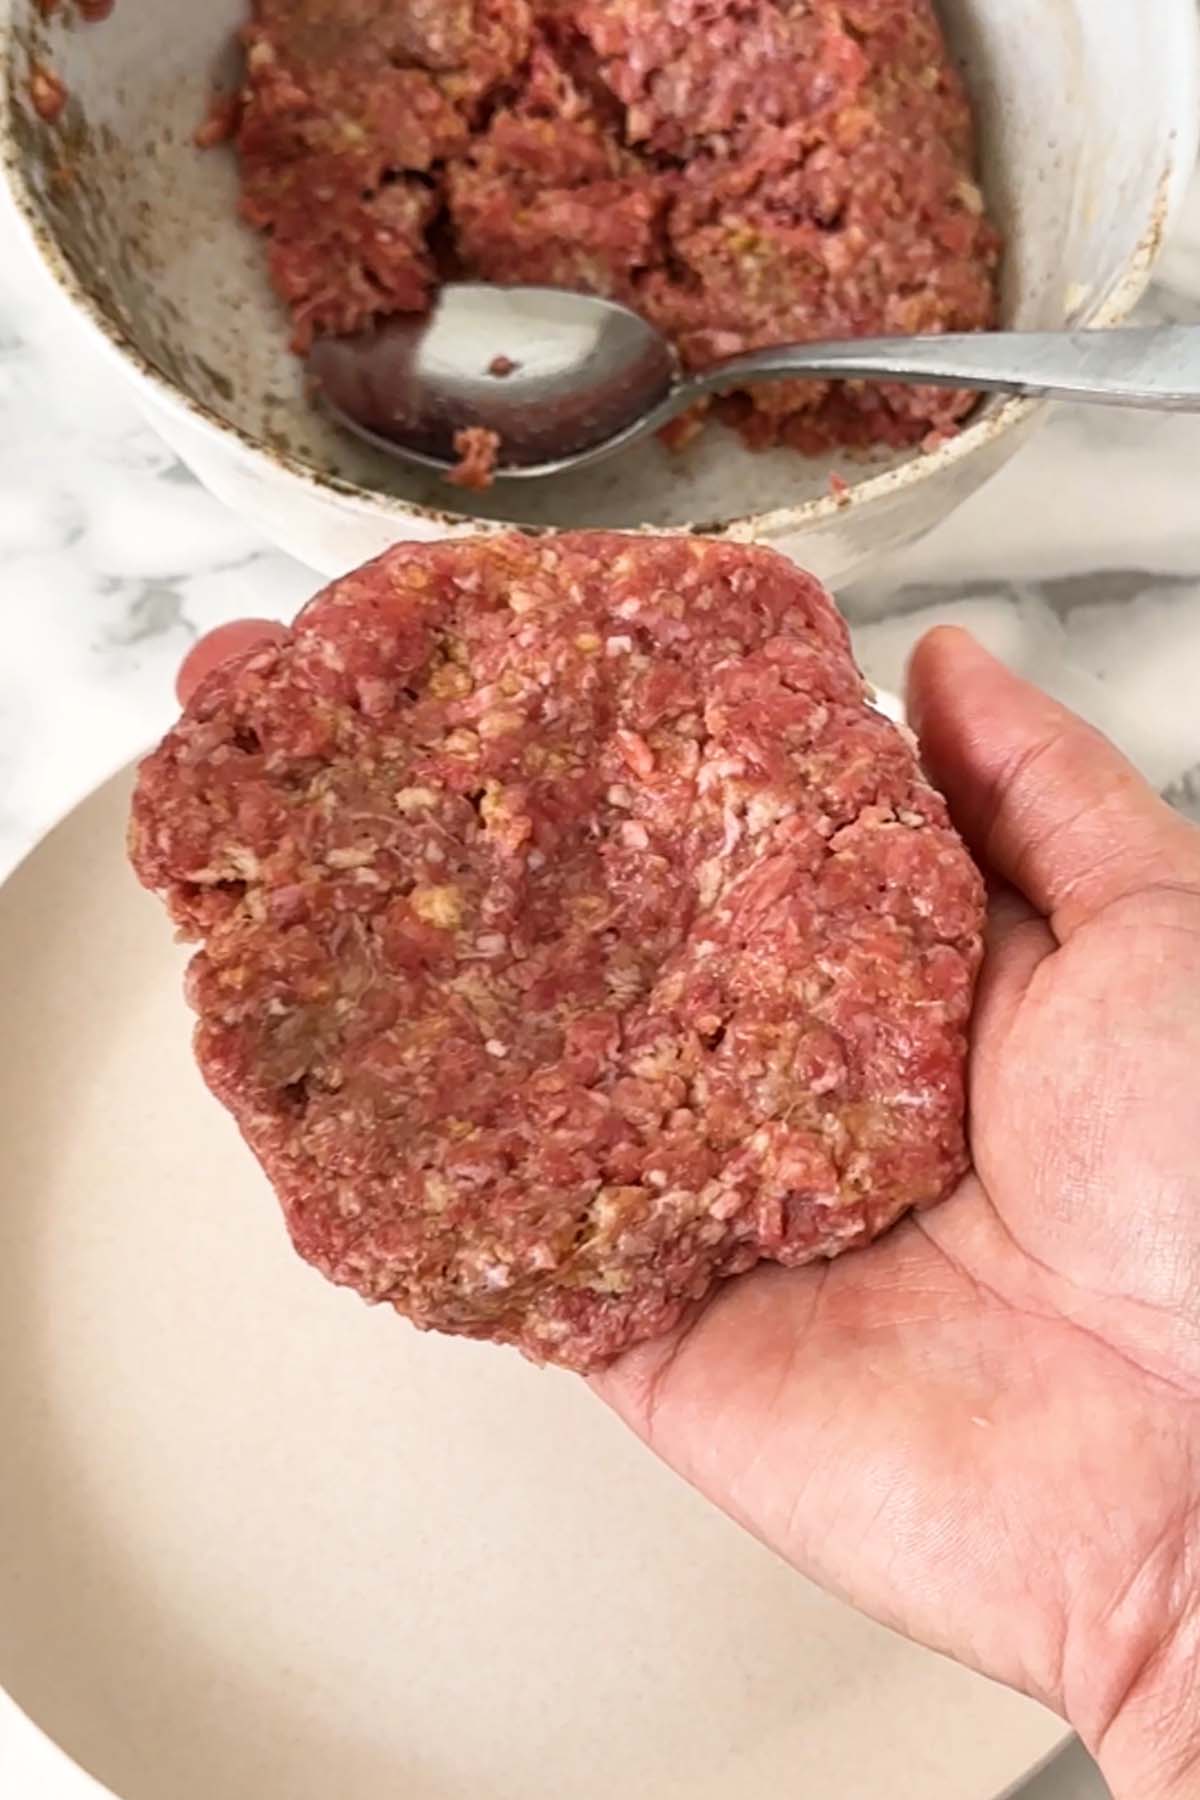 A hand holds a formed burger patty.